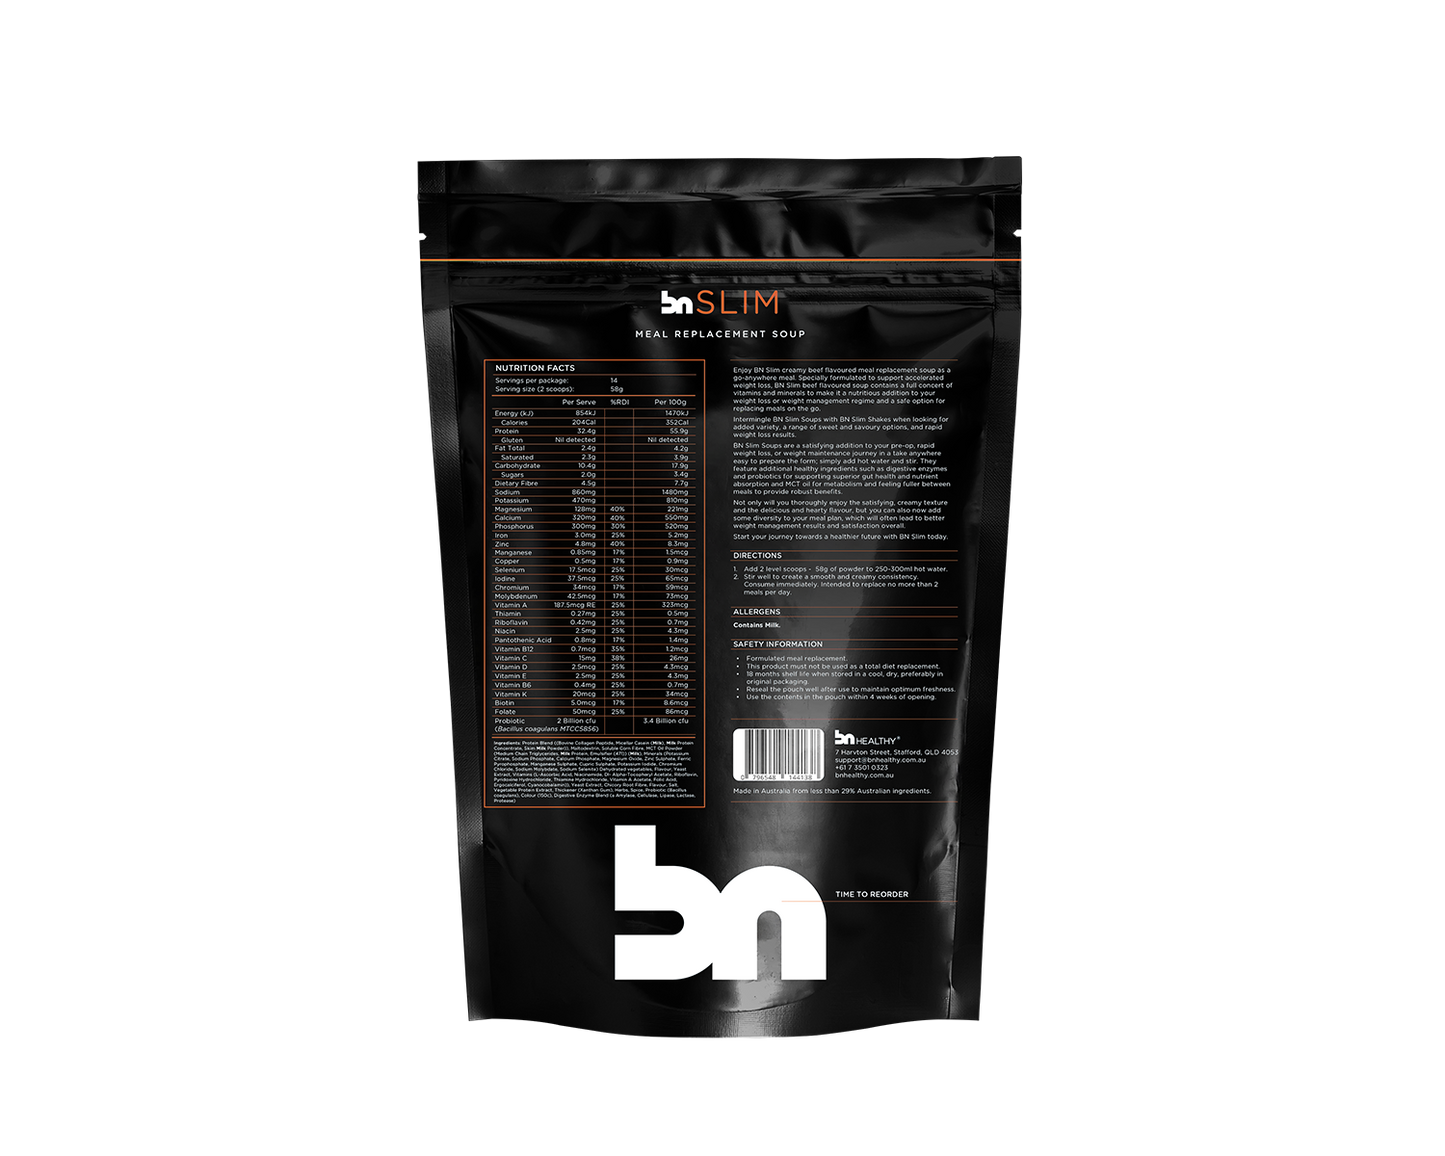 BN Slim - Meal Replacement Soup beef flavour nutritional information